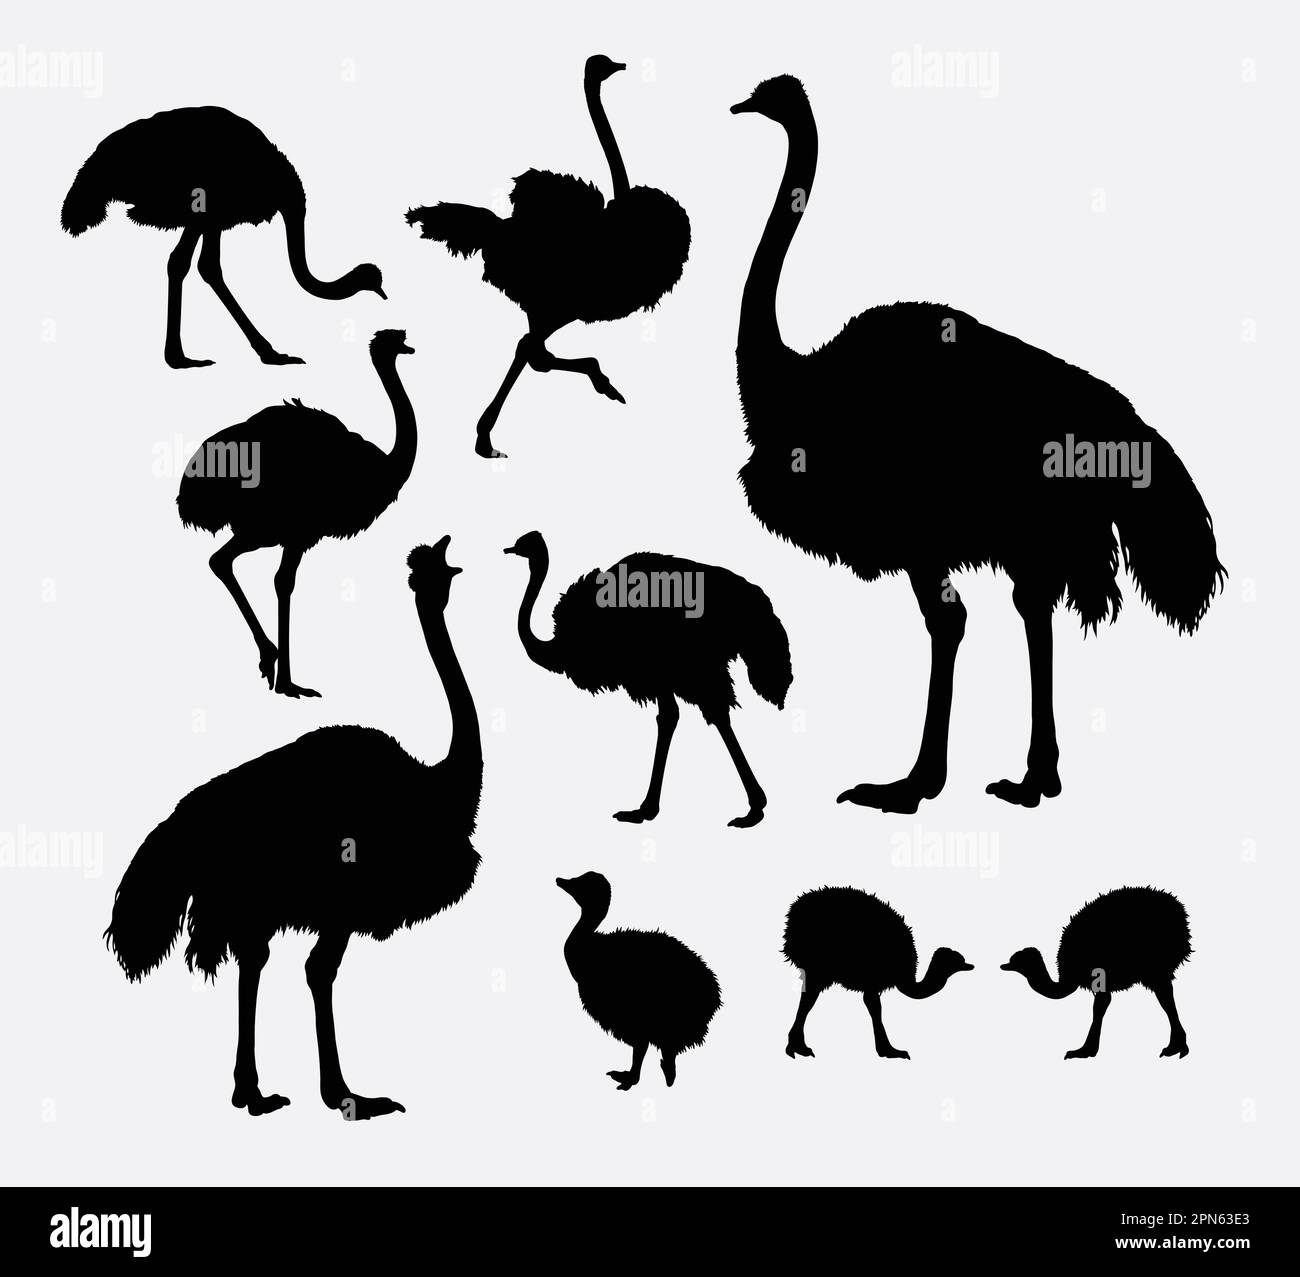 Ostrich poultry animal silhouettes. Good use for symbol, logo, web icon, game element, mascot, or any design you want. Easy to use. Stock Vector